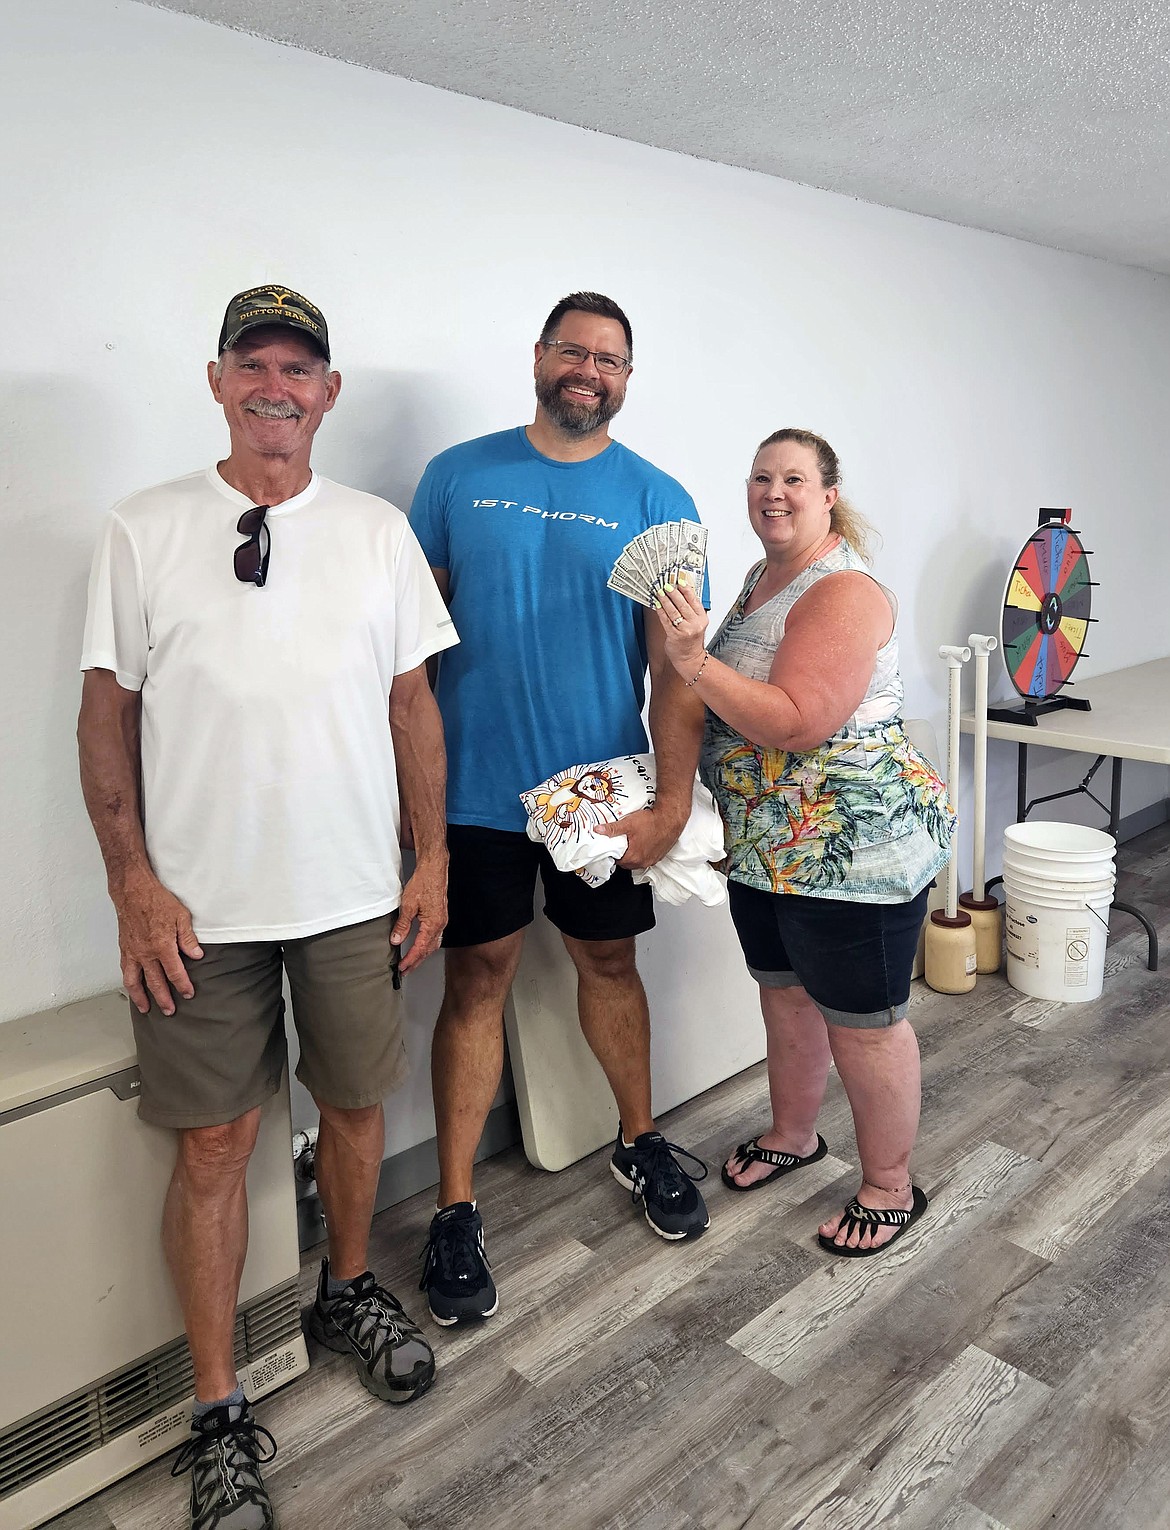 Chris Harris, center, is the winner of $1,000 in cash after his ticket was selected for the second-place prize in the Sandpoint Lions Fourth of July raffle. Pictured with Harris are Sandpoint Lions Paul and Gina Gregory.